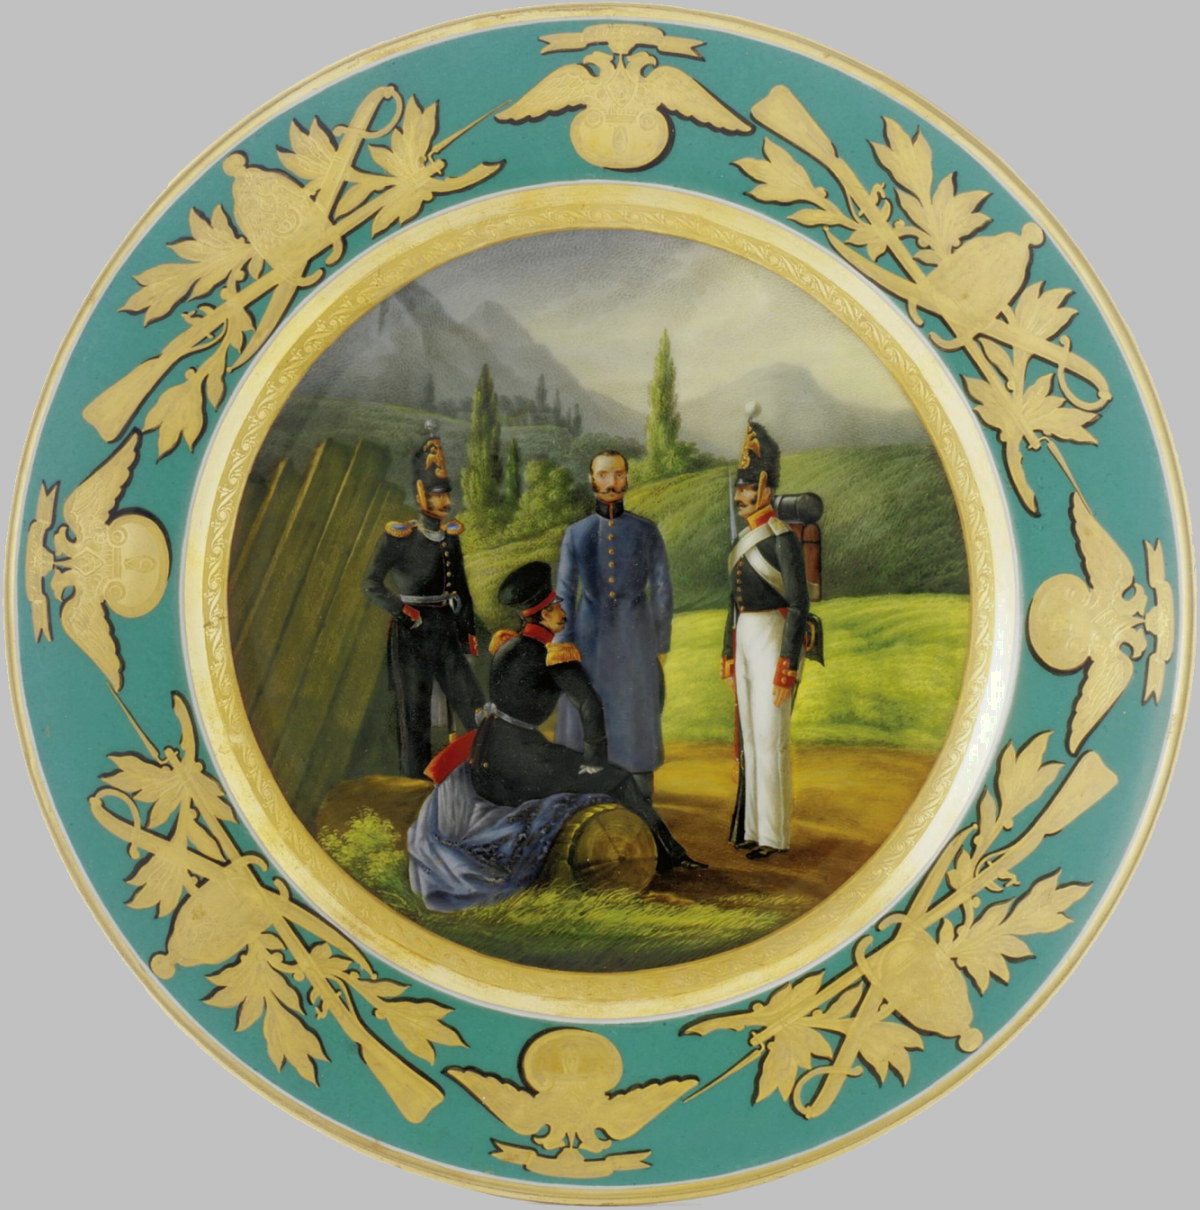 Russian Imperial Porcelain Factory military plate with turquoise border depicting a group of infantry officers and soldiers. Morozov 1841